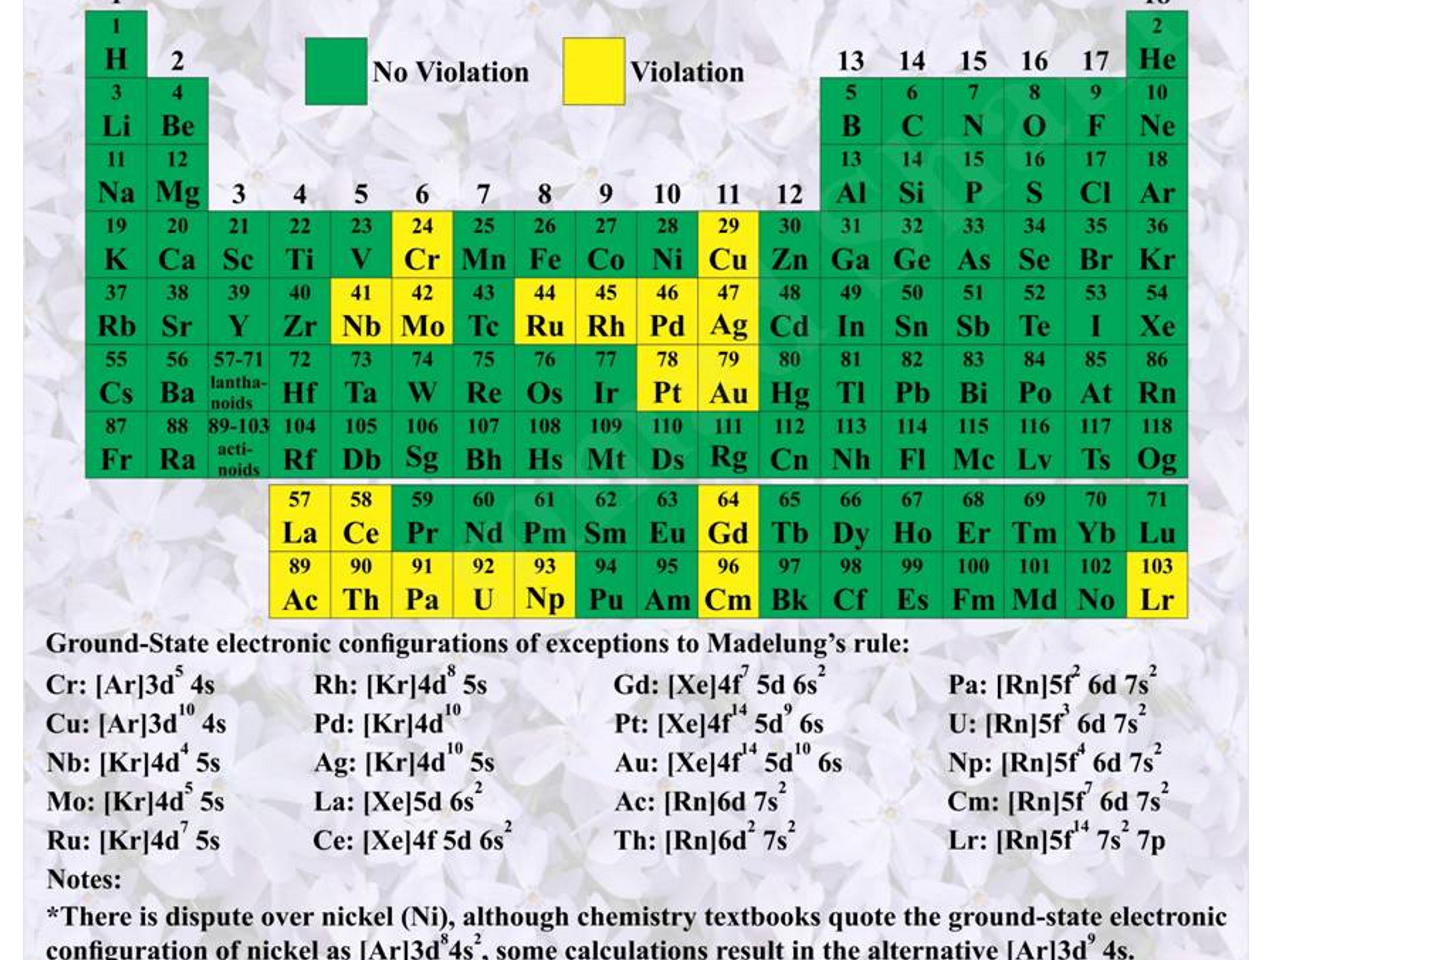 Electron Configuration Exceptions.jpg Machine generated alternative text:
Exceptions to Madelung's Rule 
The exact ground-state electronic configuration of most atoms can be found by use of aufbau principle 
and Madelung's energy ordering rule. However exact ground-state electronic configurations of some 
atoms denoted by yellow in the below periodic table can't be found in this way. 
1 
H 
Li 
a 
19 
K 
37 
55 
s 
37 
2 
M 
20 
56 
88 
No Violation 
3 
sc 
57-71 
lantha- 
.00ids j _ 
89-103 
acti- 
4 
5 
6 
24 
Cr 
7 
n 
8 
Violation 
9 10 11 
29 
Cu 
72 
104 105 106 
57 58 
La Ce 
89 90 91 
Ac Th Pa 
75 
78 79 
Re os 1 Pt Au 
107 
108 109 
Bh Hs •at JDs 
64 
Sm E Gd 
94 9S 96 
Cm 
12 
80 
112 
b 
7 
13 14 
13 
14 
31 
32 
81 82 
j 113 114 
Dy Ho 
| 98 99 
15 
N 
15 
33 
As 
83 
115 
100 
16 
16 
34 
Se 
52 
84 
PO 
116 
Tm 
101 
17 
F 
17 
35 
53 
85 
At 
117 
10 
18 
10 
N 
18 
36 
54 
86 
118 
103 
Ground-State electronic configurations of exceptions to Madelung's rule: 
cr: IAr13dS 4s 
cu: IAr13d10 4s 
Nb: [Kr14d4 5s 
MO: IKr14dS 5S 
Ru: 1Kr14d7 5s 
Notes: 
Rh: IKr14d* 5s 
PCI: 1Kr14d10 
_Ag: IKr14d10 5s 
2 
La: IXe15d 6s 
Ce: IXe14f5d 6s 
Gd: IXe14f7 5d 6s2 
pe 5d9 6s 
Au: IXe14d4 5d10 6s 
Ac: [Rn16d 7s 
Th: IRn16d2 7s2 
Pa: [Rn15f2 6d 7s2 
U: IRn15/ 6d 7s2 
Np: IRn15fA 6d 7s2 
cm: IRn15f7 6d Is 
Lr: 7s2 71) 
0 
*There is dispute over nickel (Ni), although chemistry textbooks quote the ground-state electronic 
configuration of nickel as IAr13d84s , some calculations result in the alternative IAr13d9 4s. 
*The ground-state electronic configurations of 7th-period atoms with higher atomic numbers (Mt 
and afterwards) are predicted (and not observed) to obey Madelung's rule.J/%3/tammac/ 
